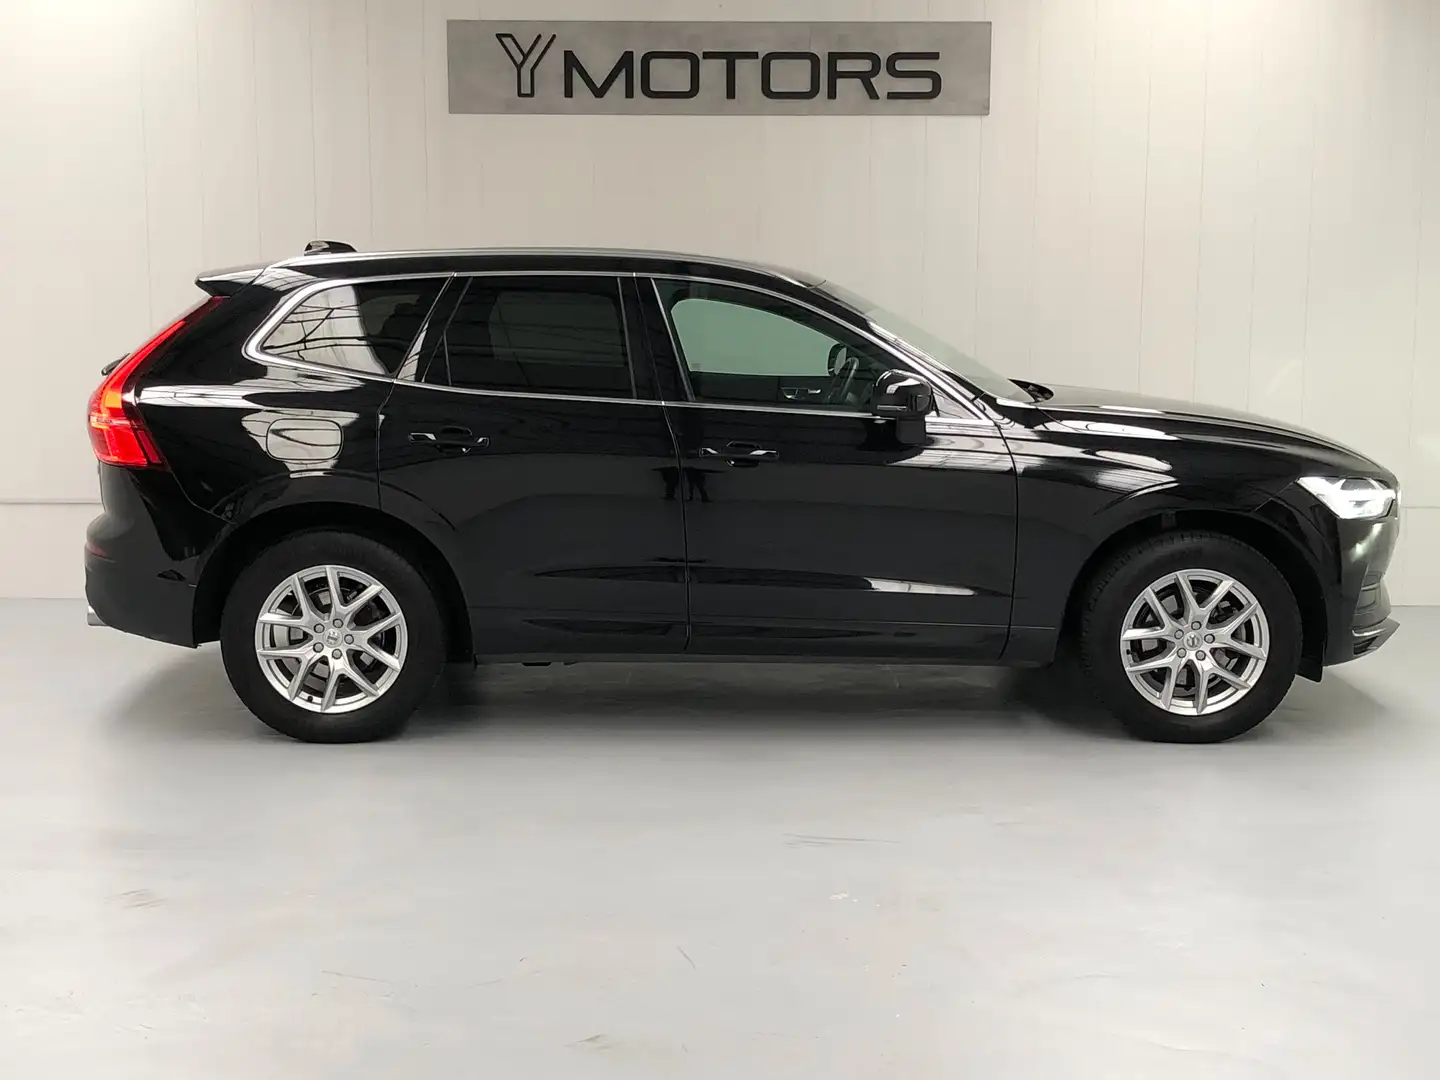 Volvo XC60 2.0 D4 GEARTRONIC MOMENTUM 163 CH FULL LED ACC Noir - 2